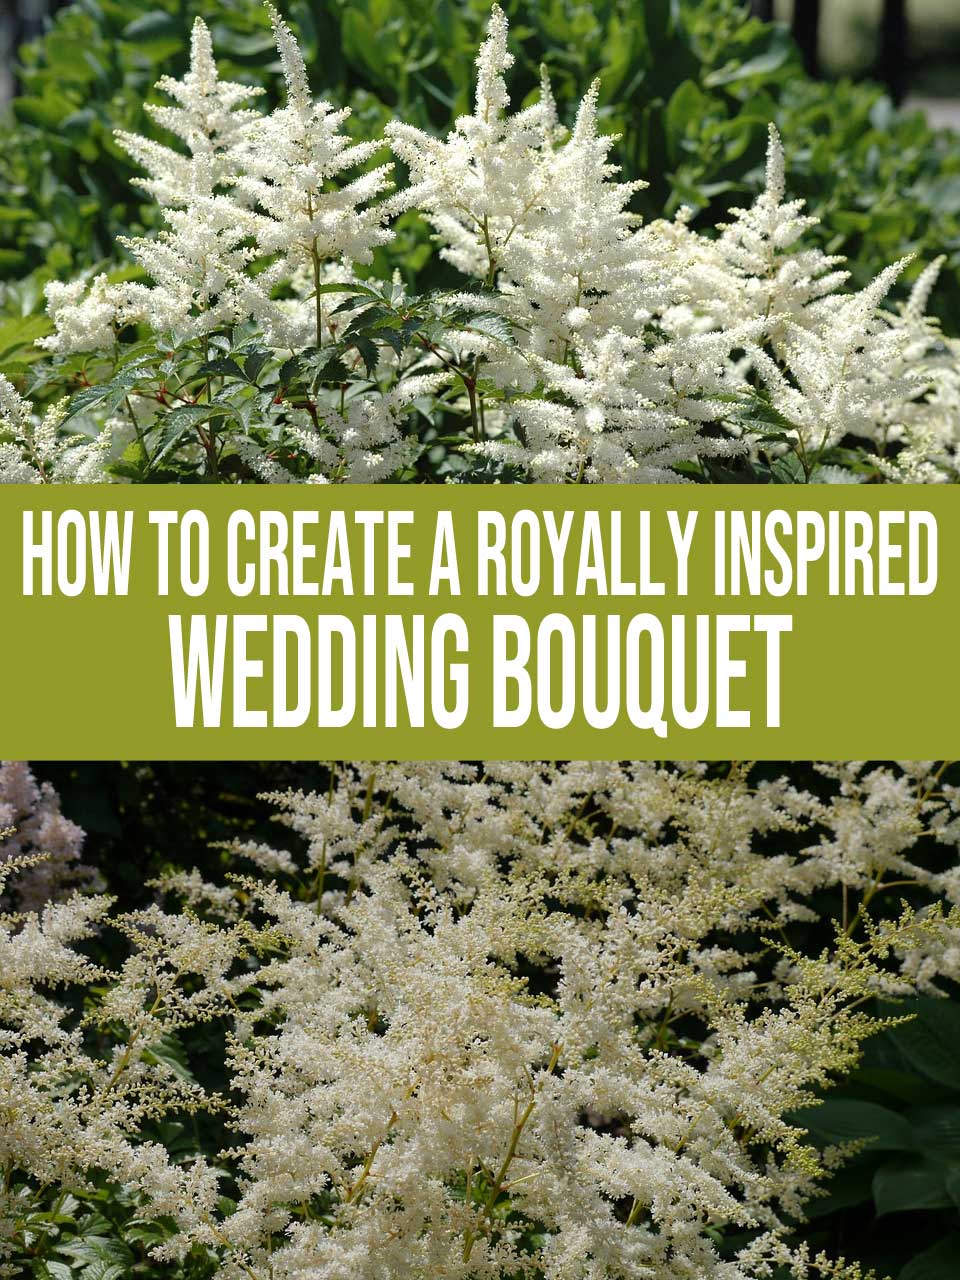 royally inspired wedding bouquet